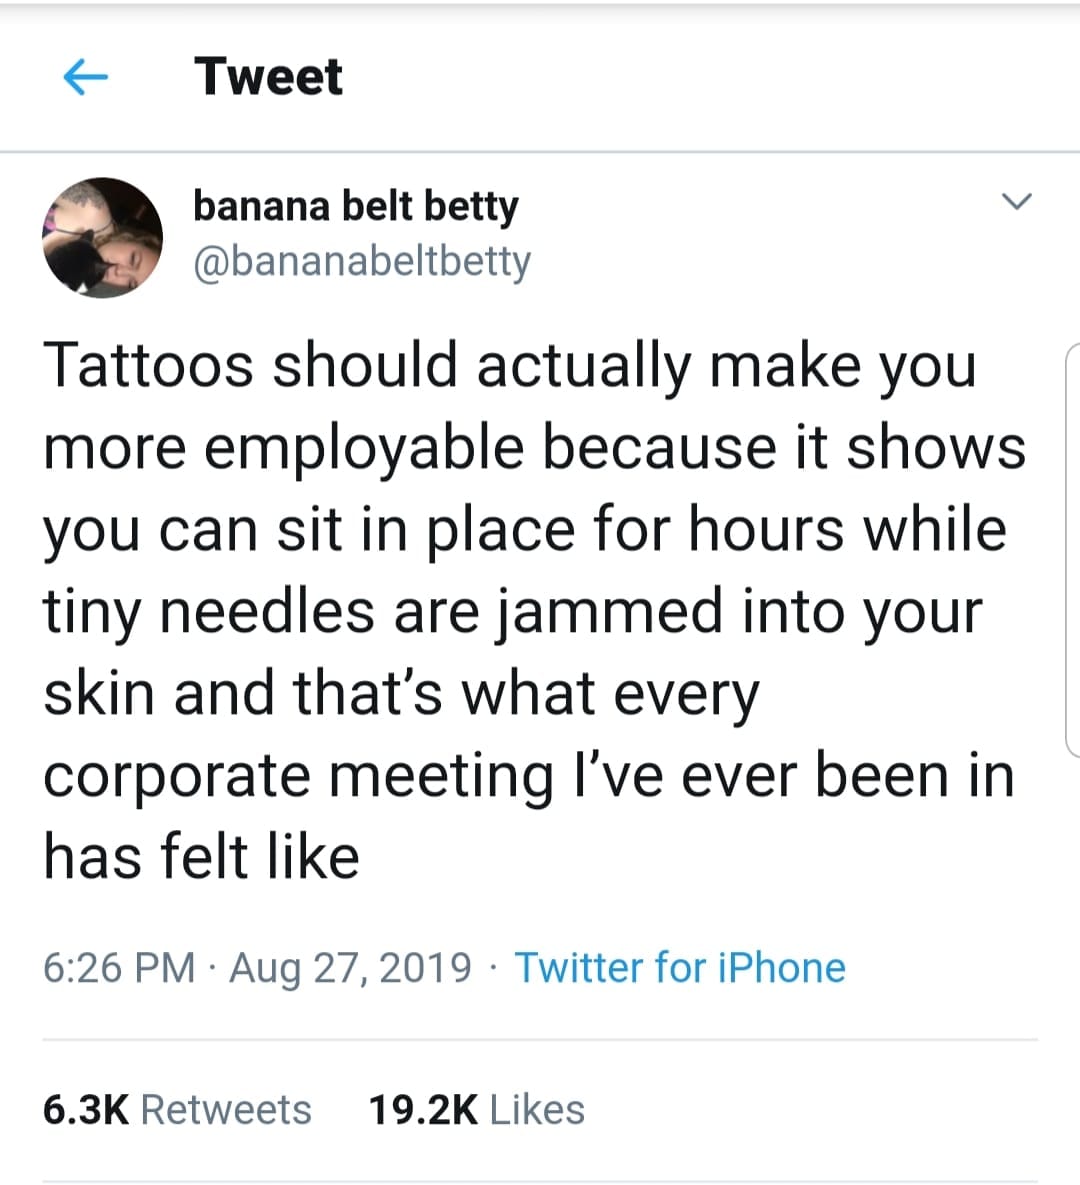 tattoos should actually make you more employable because it shows you can sit in place for hours while tiny needles are jammed into your skin, and that's what every corporate meeting feels like